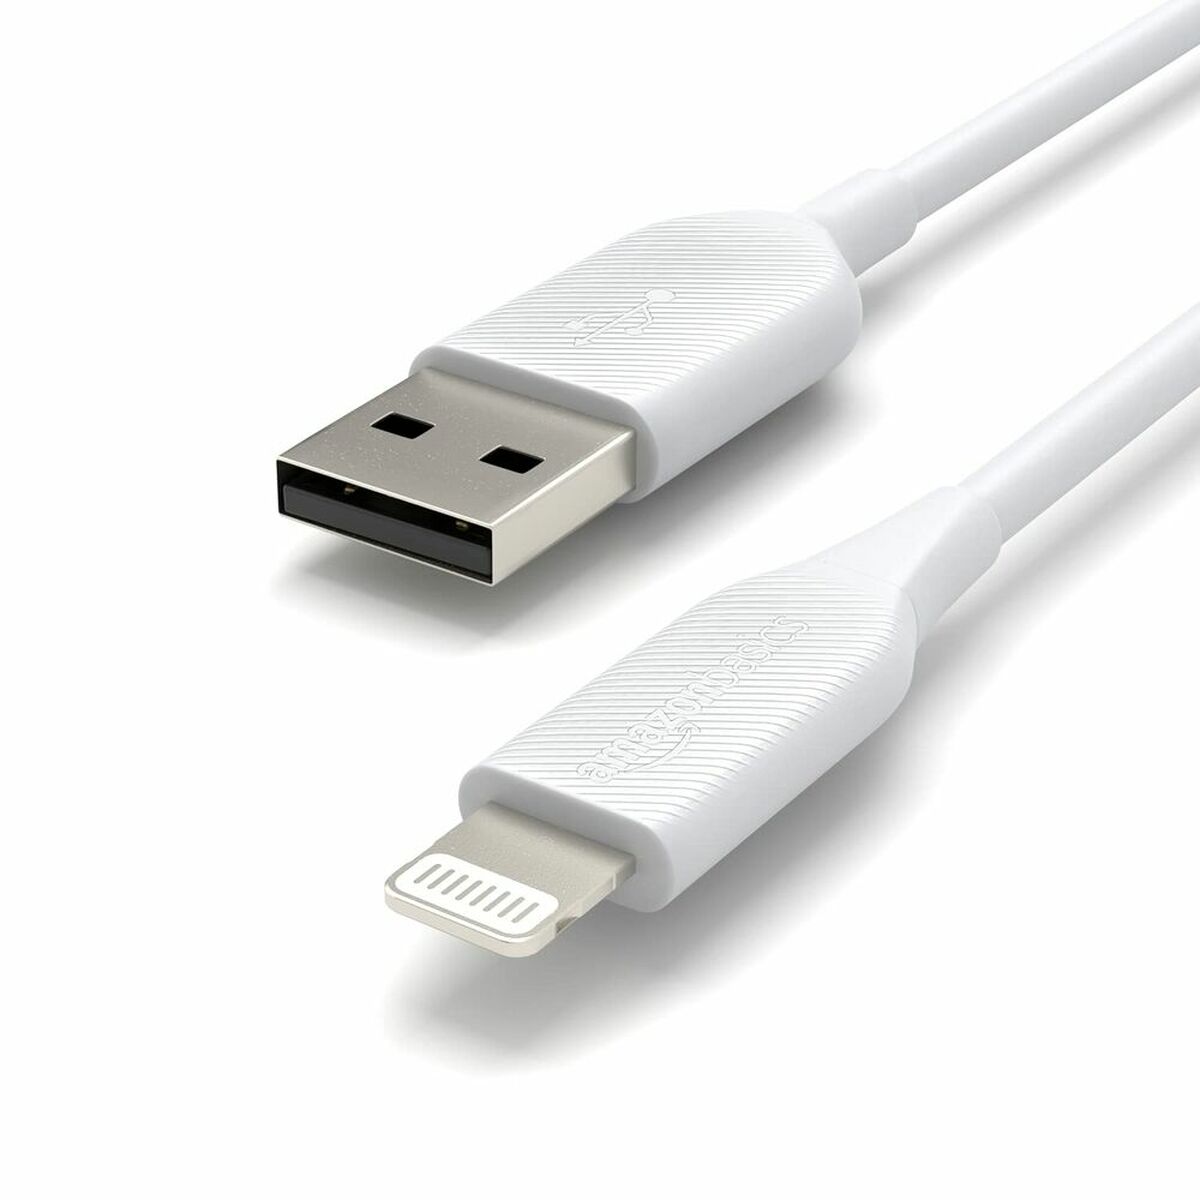 USB to Lightning Cable L6LMF863-CS-R (Refurbished A+)